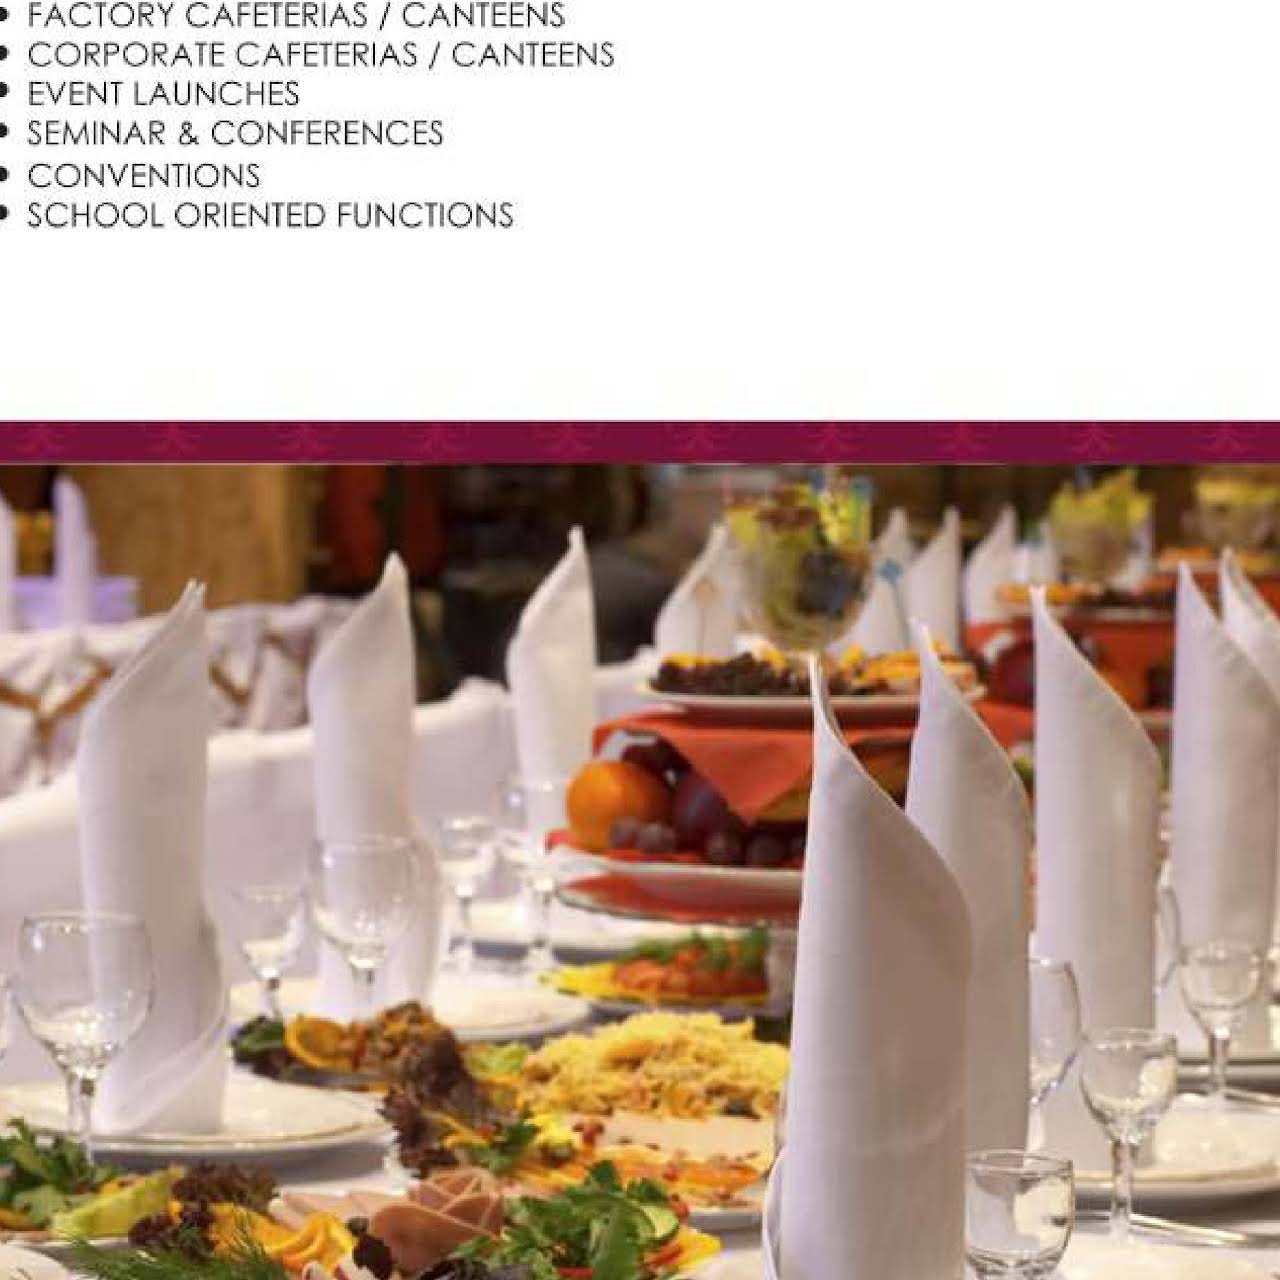 Fours Favous Caterers Event Services | Catering Services